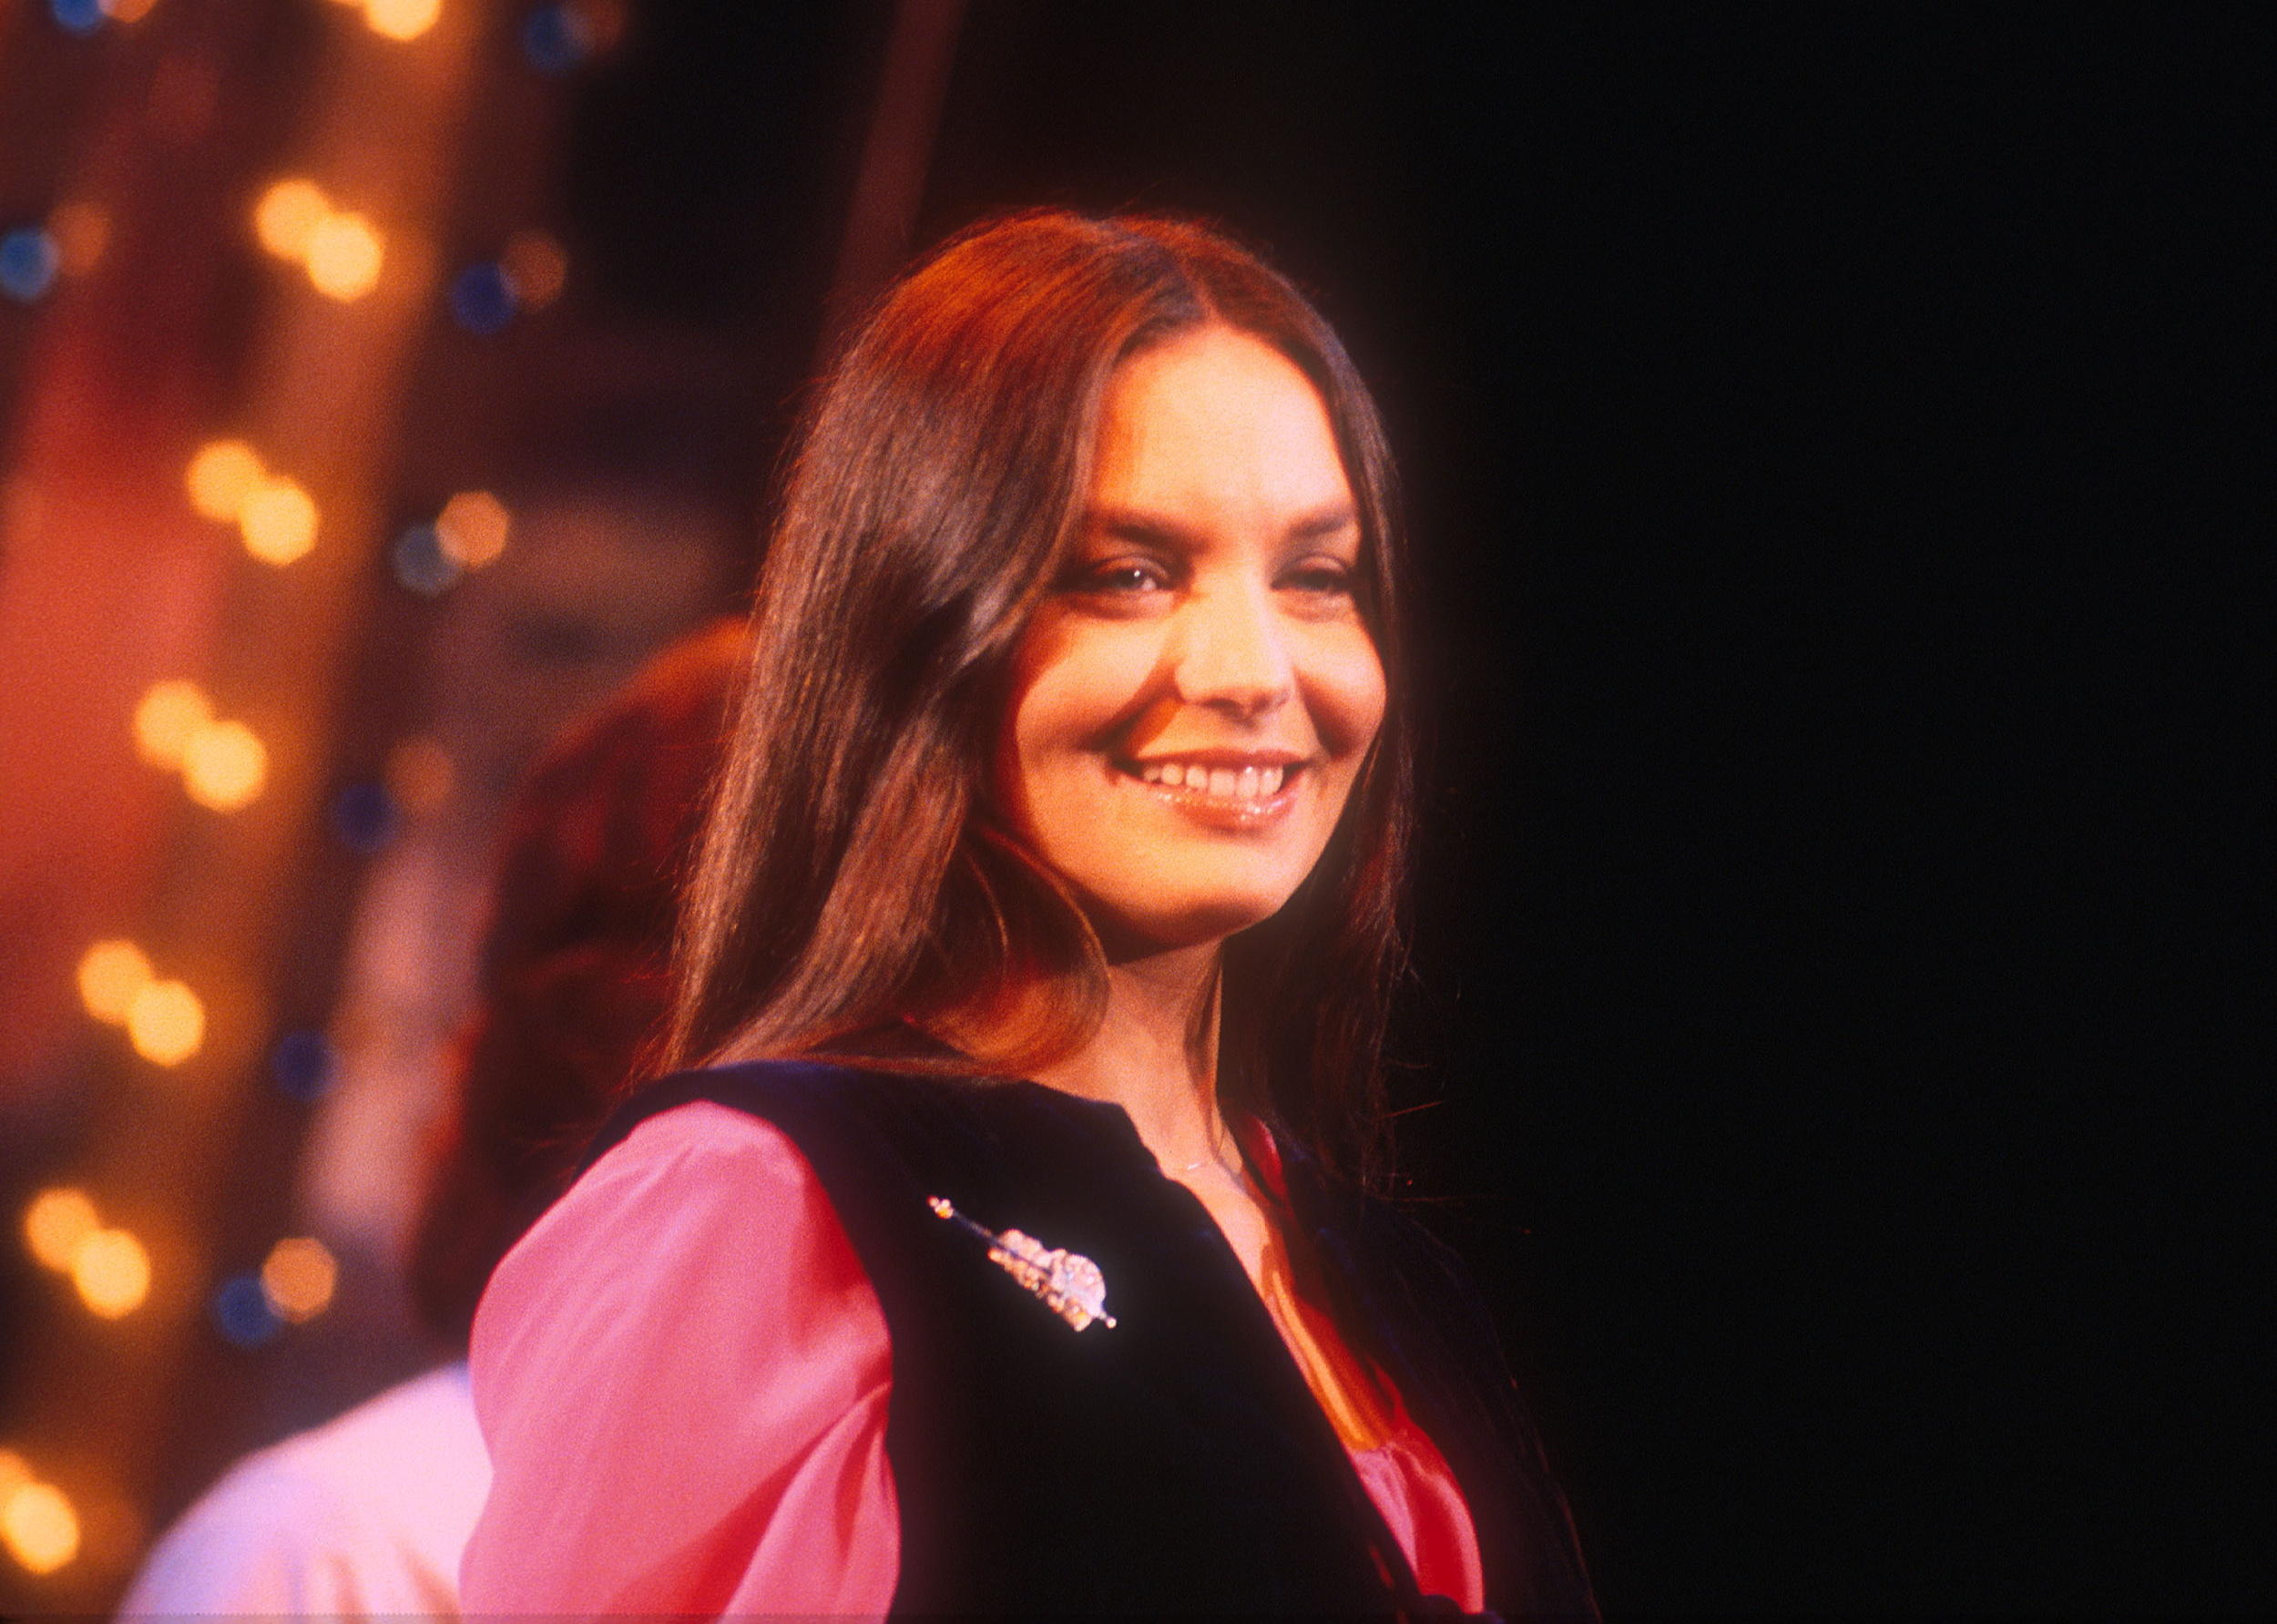 <p>The sister of Loretta Lynn, Crystal Gayle was a star in her own right in the 1970s, helping to cement the pop-country genre with songs like “Don’t It Make My Brown Eyes Blue.” However traditionalists feel about the popularity of pop-country, there’s no denying its place in the genre. </p><p><a href='https://www.msn.com/en-us/community/channel/vid-cj9pqbr0vn9in2b6ddcd8sfgpfq6x6utp44fssrv6mc2gtybw0us'>Follow us on MSN to see more of our exclusive entertainment content.</a></p>